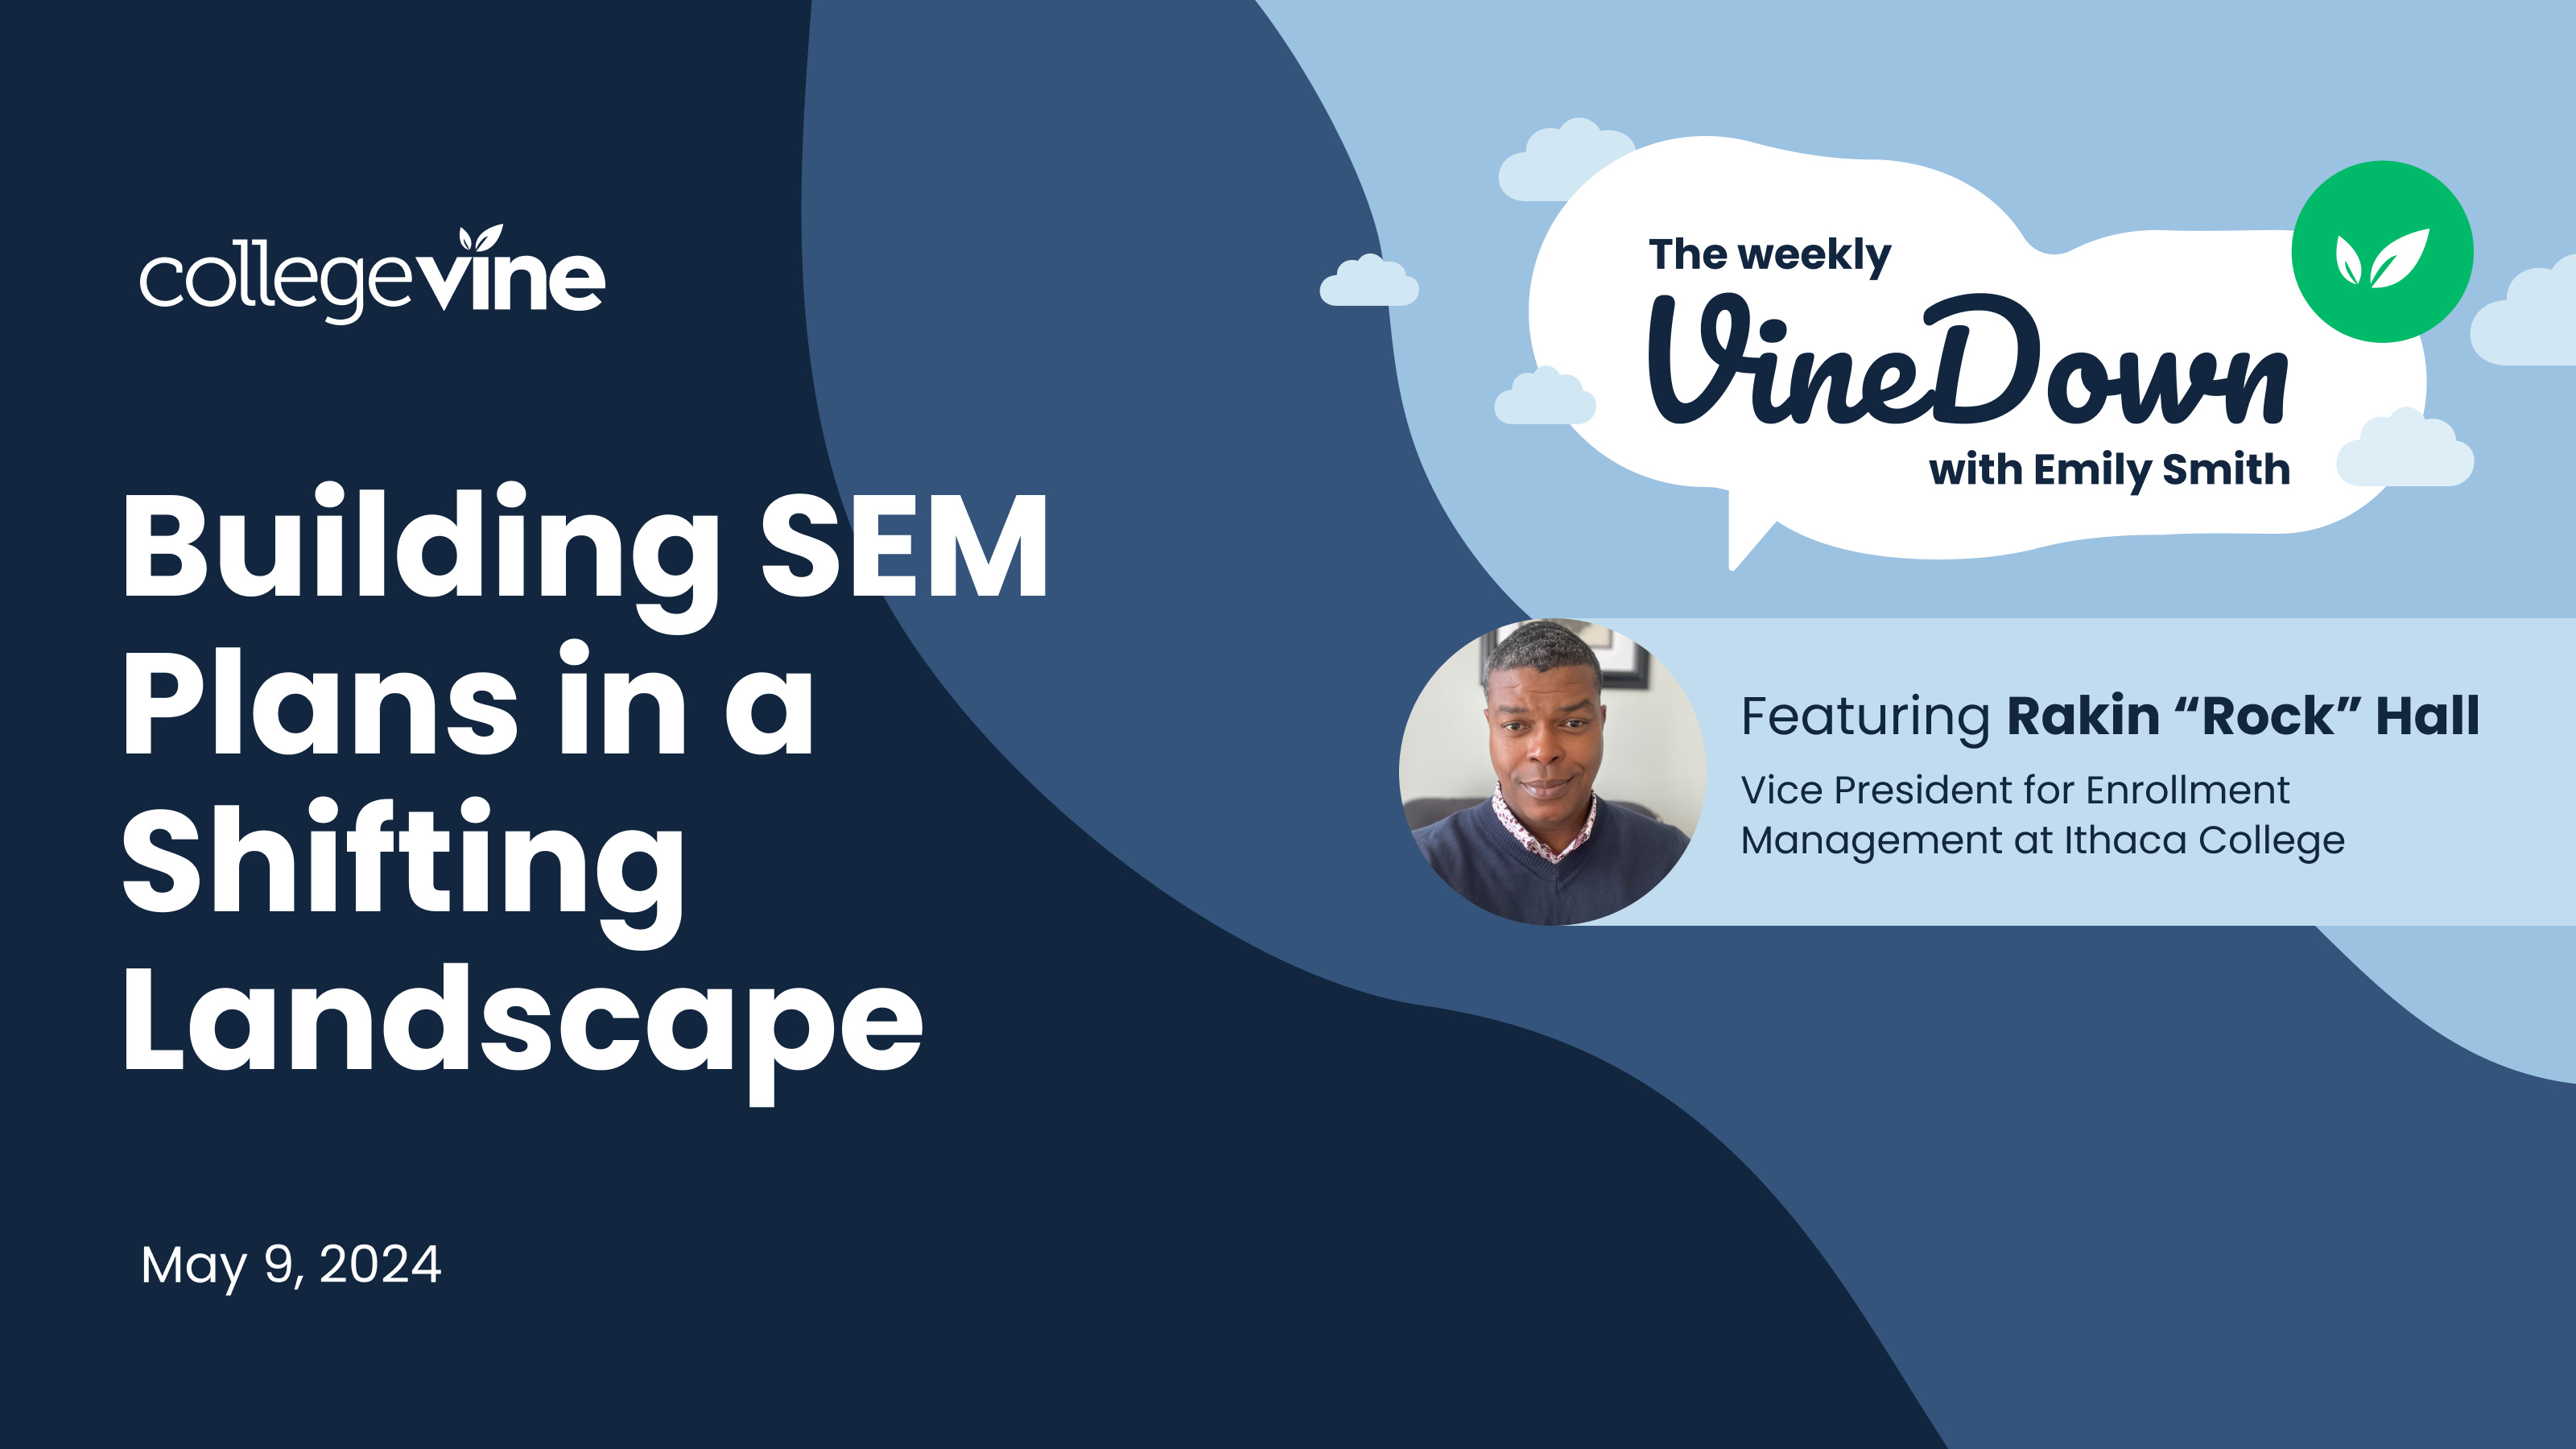 The Weekly VineDown: Building SEM Plans in a Shifting Landscape